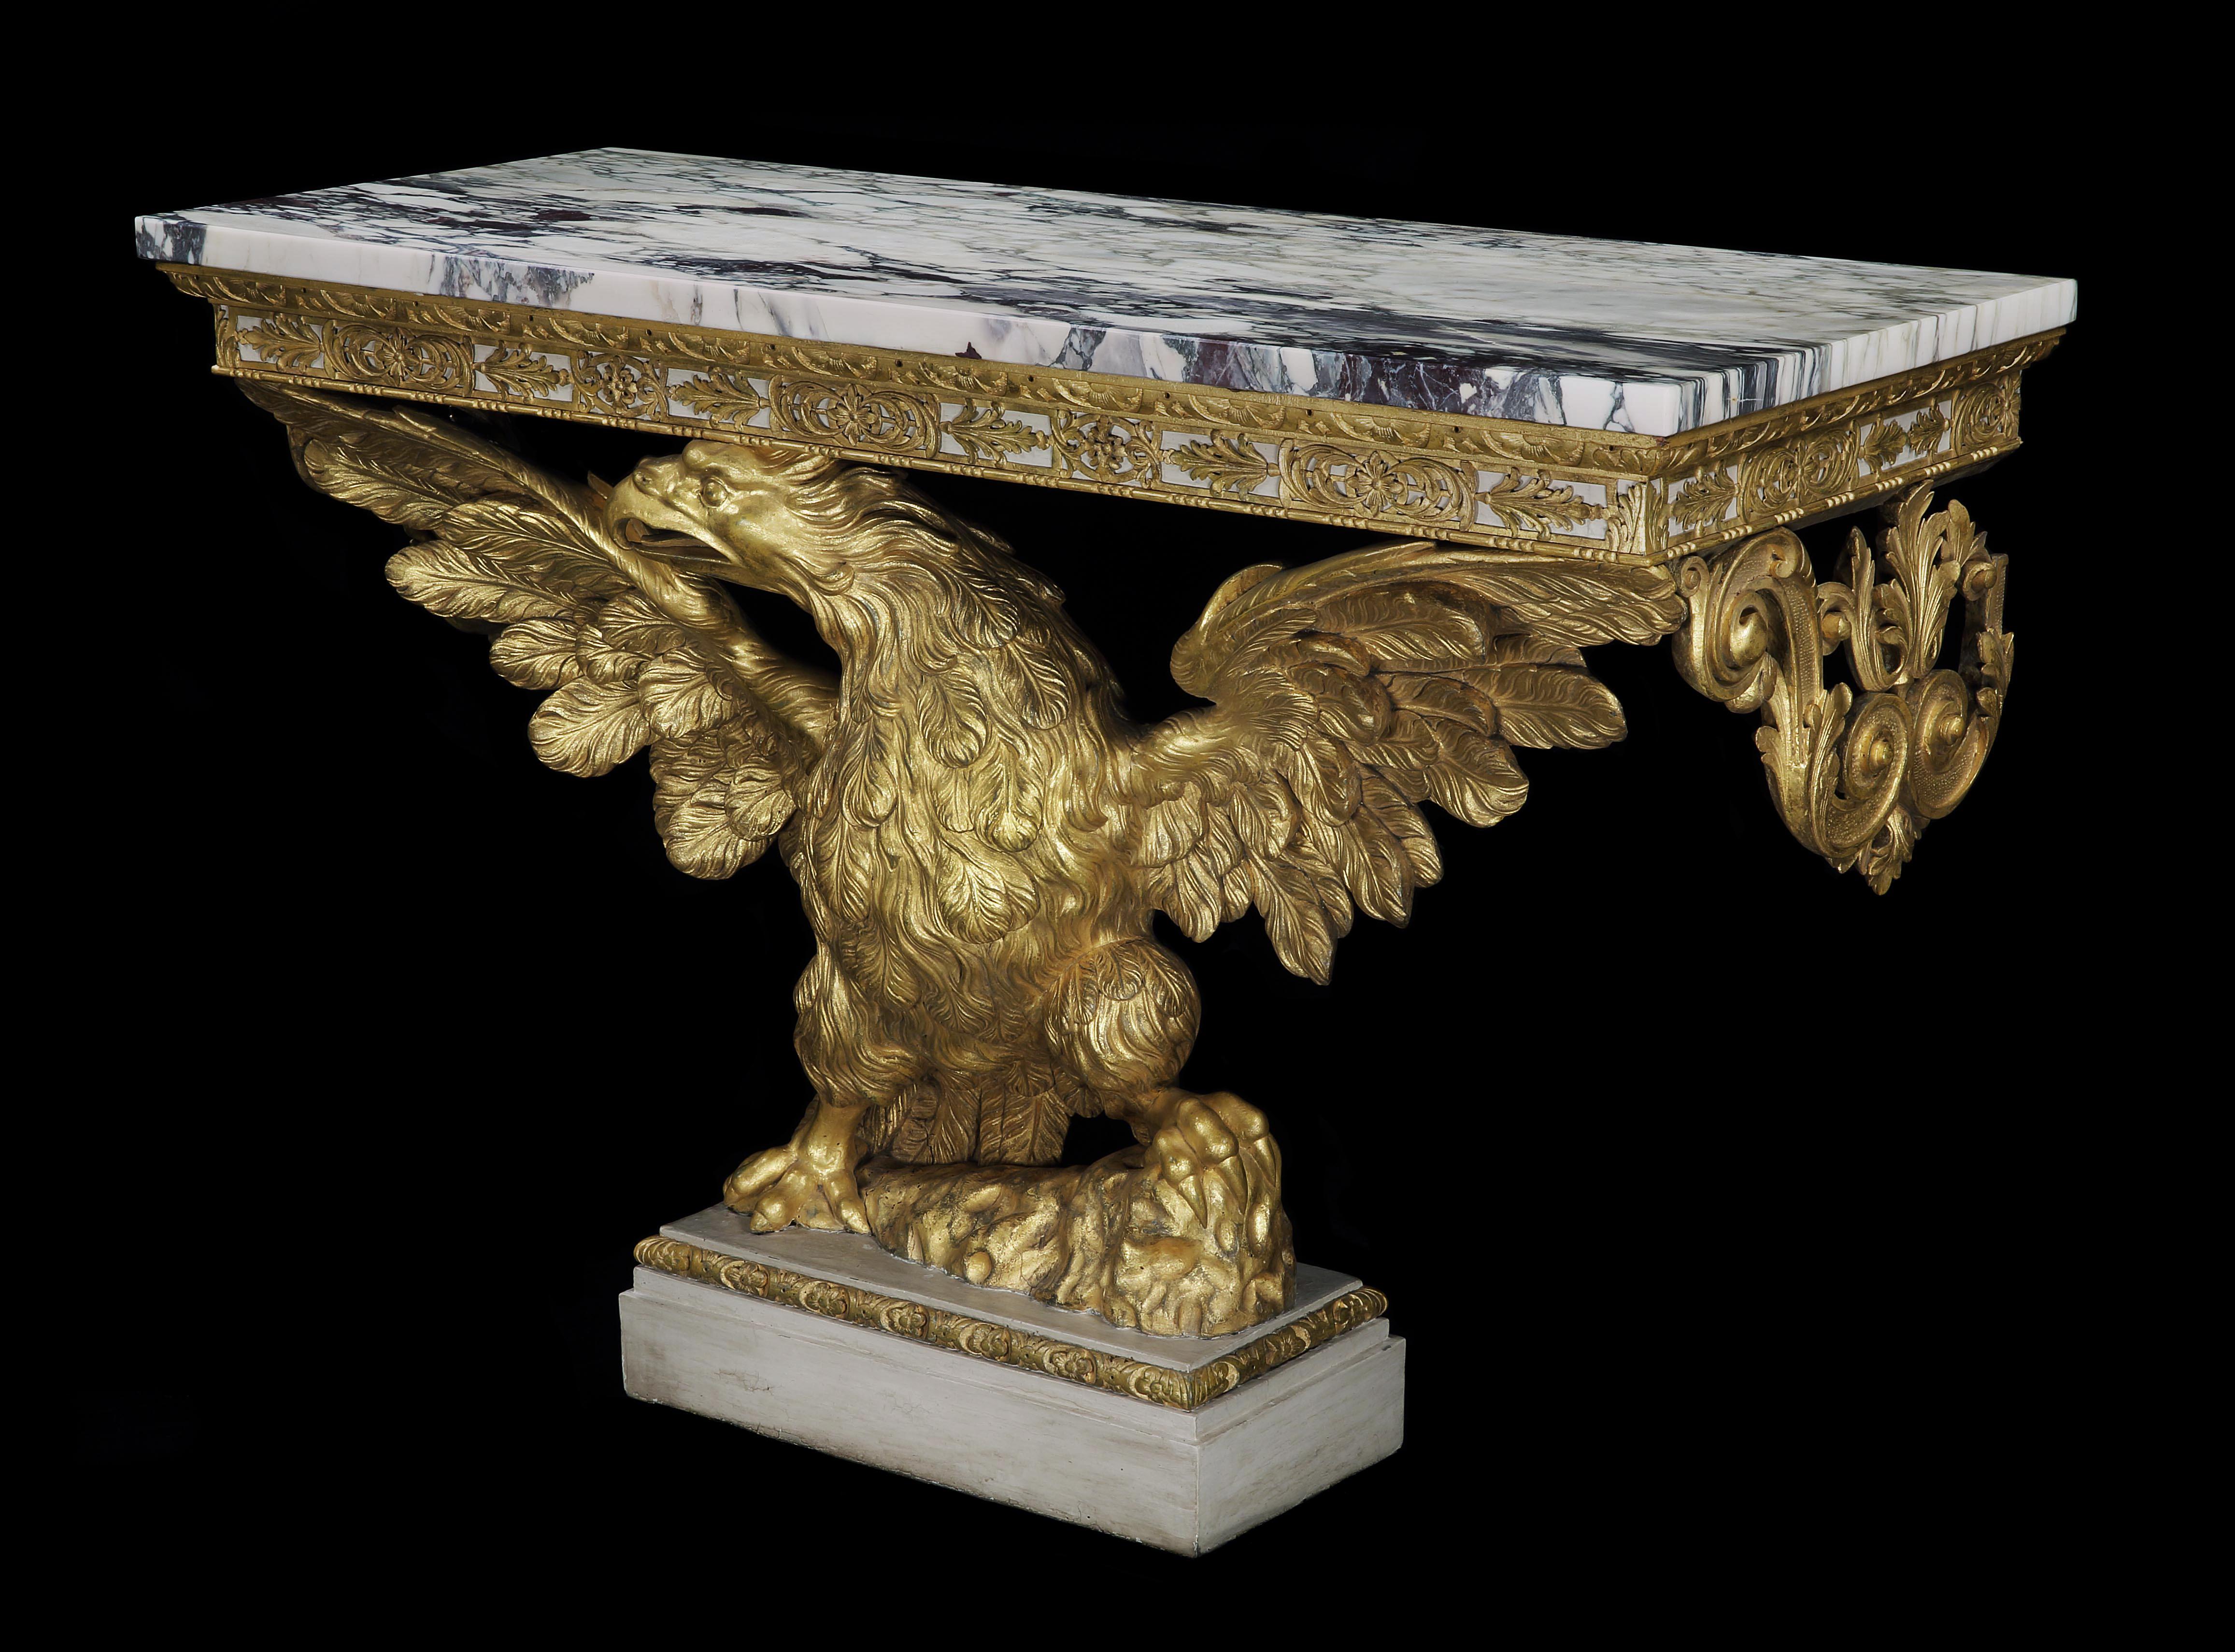 An exceptional and beautifully proportioned George II carved giltwood console table, the 'Carrara Brescia' marble top above a frieze carved with acanthus leaves, supported by a eagle with elegant out stretched wings standing on rockwork.

English,